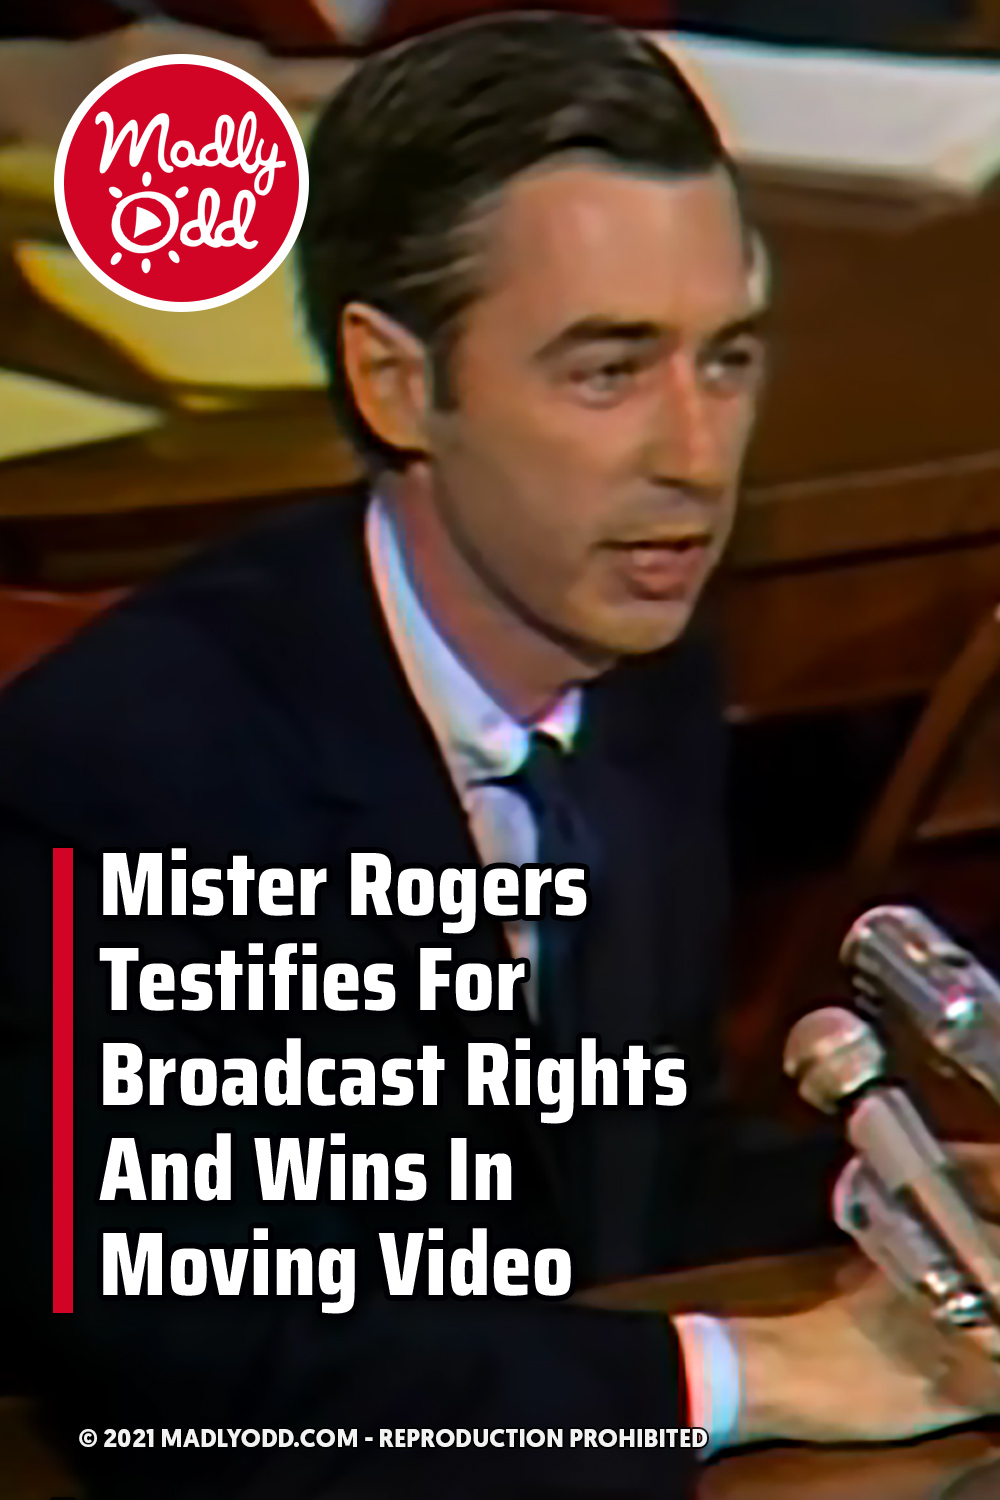 Mister Rogers Testifies For Broadcast Rights And Wins In Moving Video